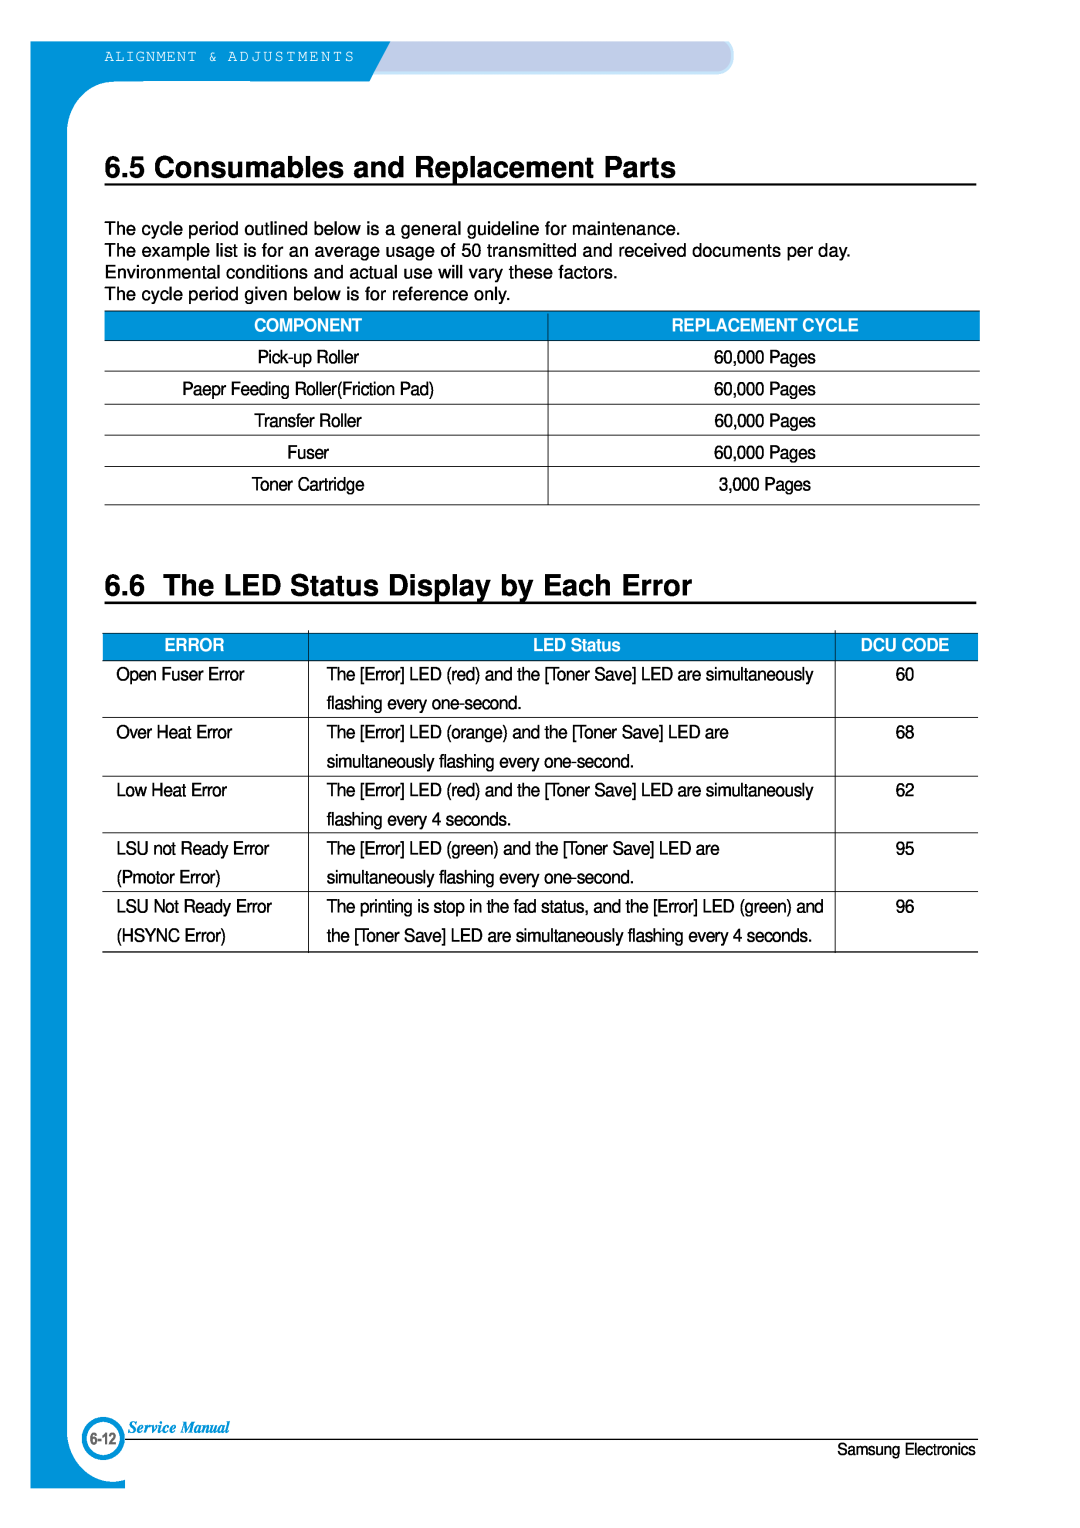 Samsung ML-1700 Consumables and Replacement Parts, The LED Status Display by Each Error, Component, Replacement Cycle 